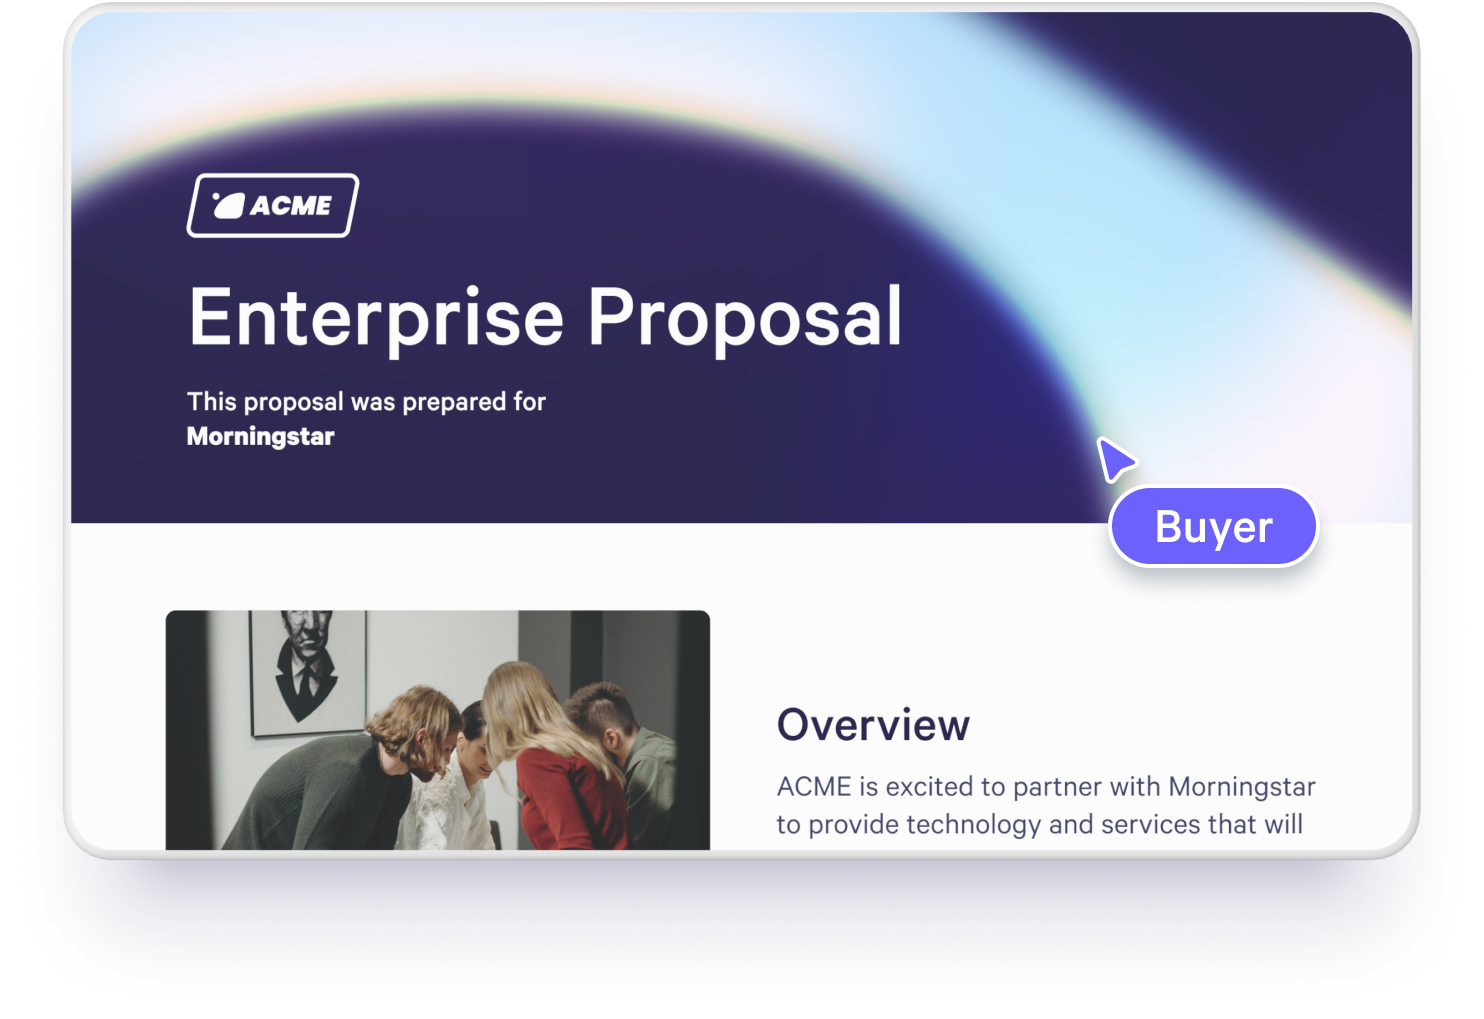 Impress your buyers with visually stunning web based proposals and sales collateral